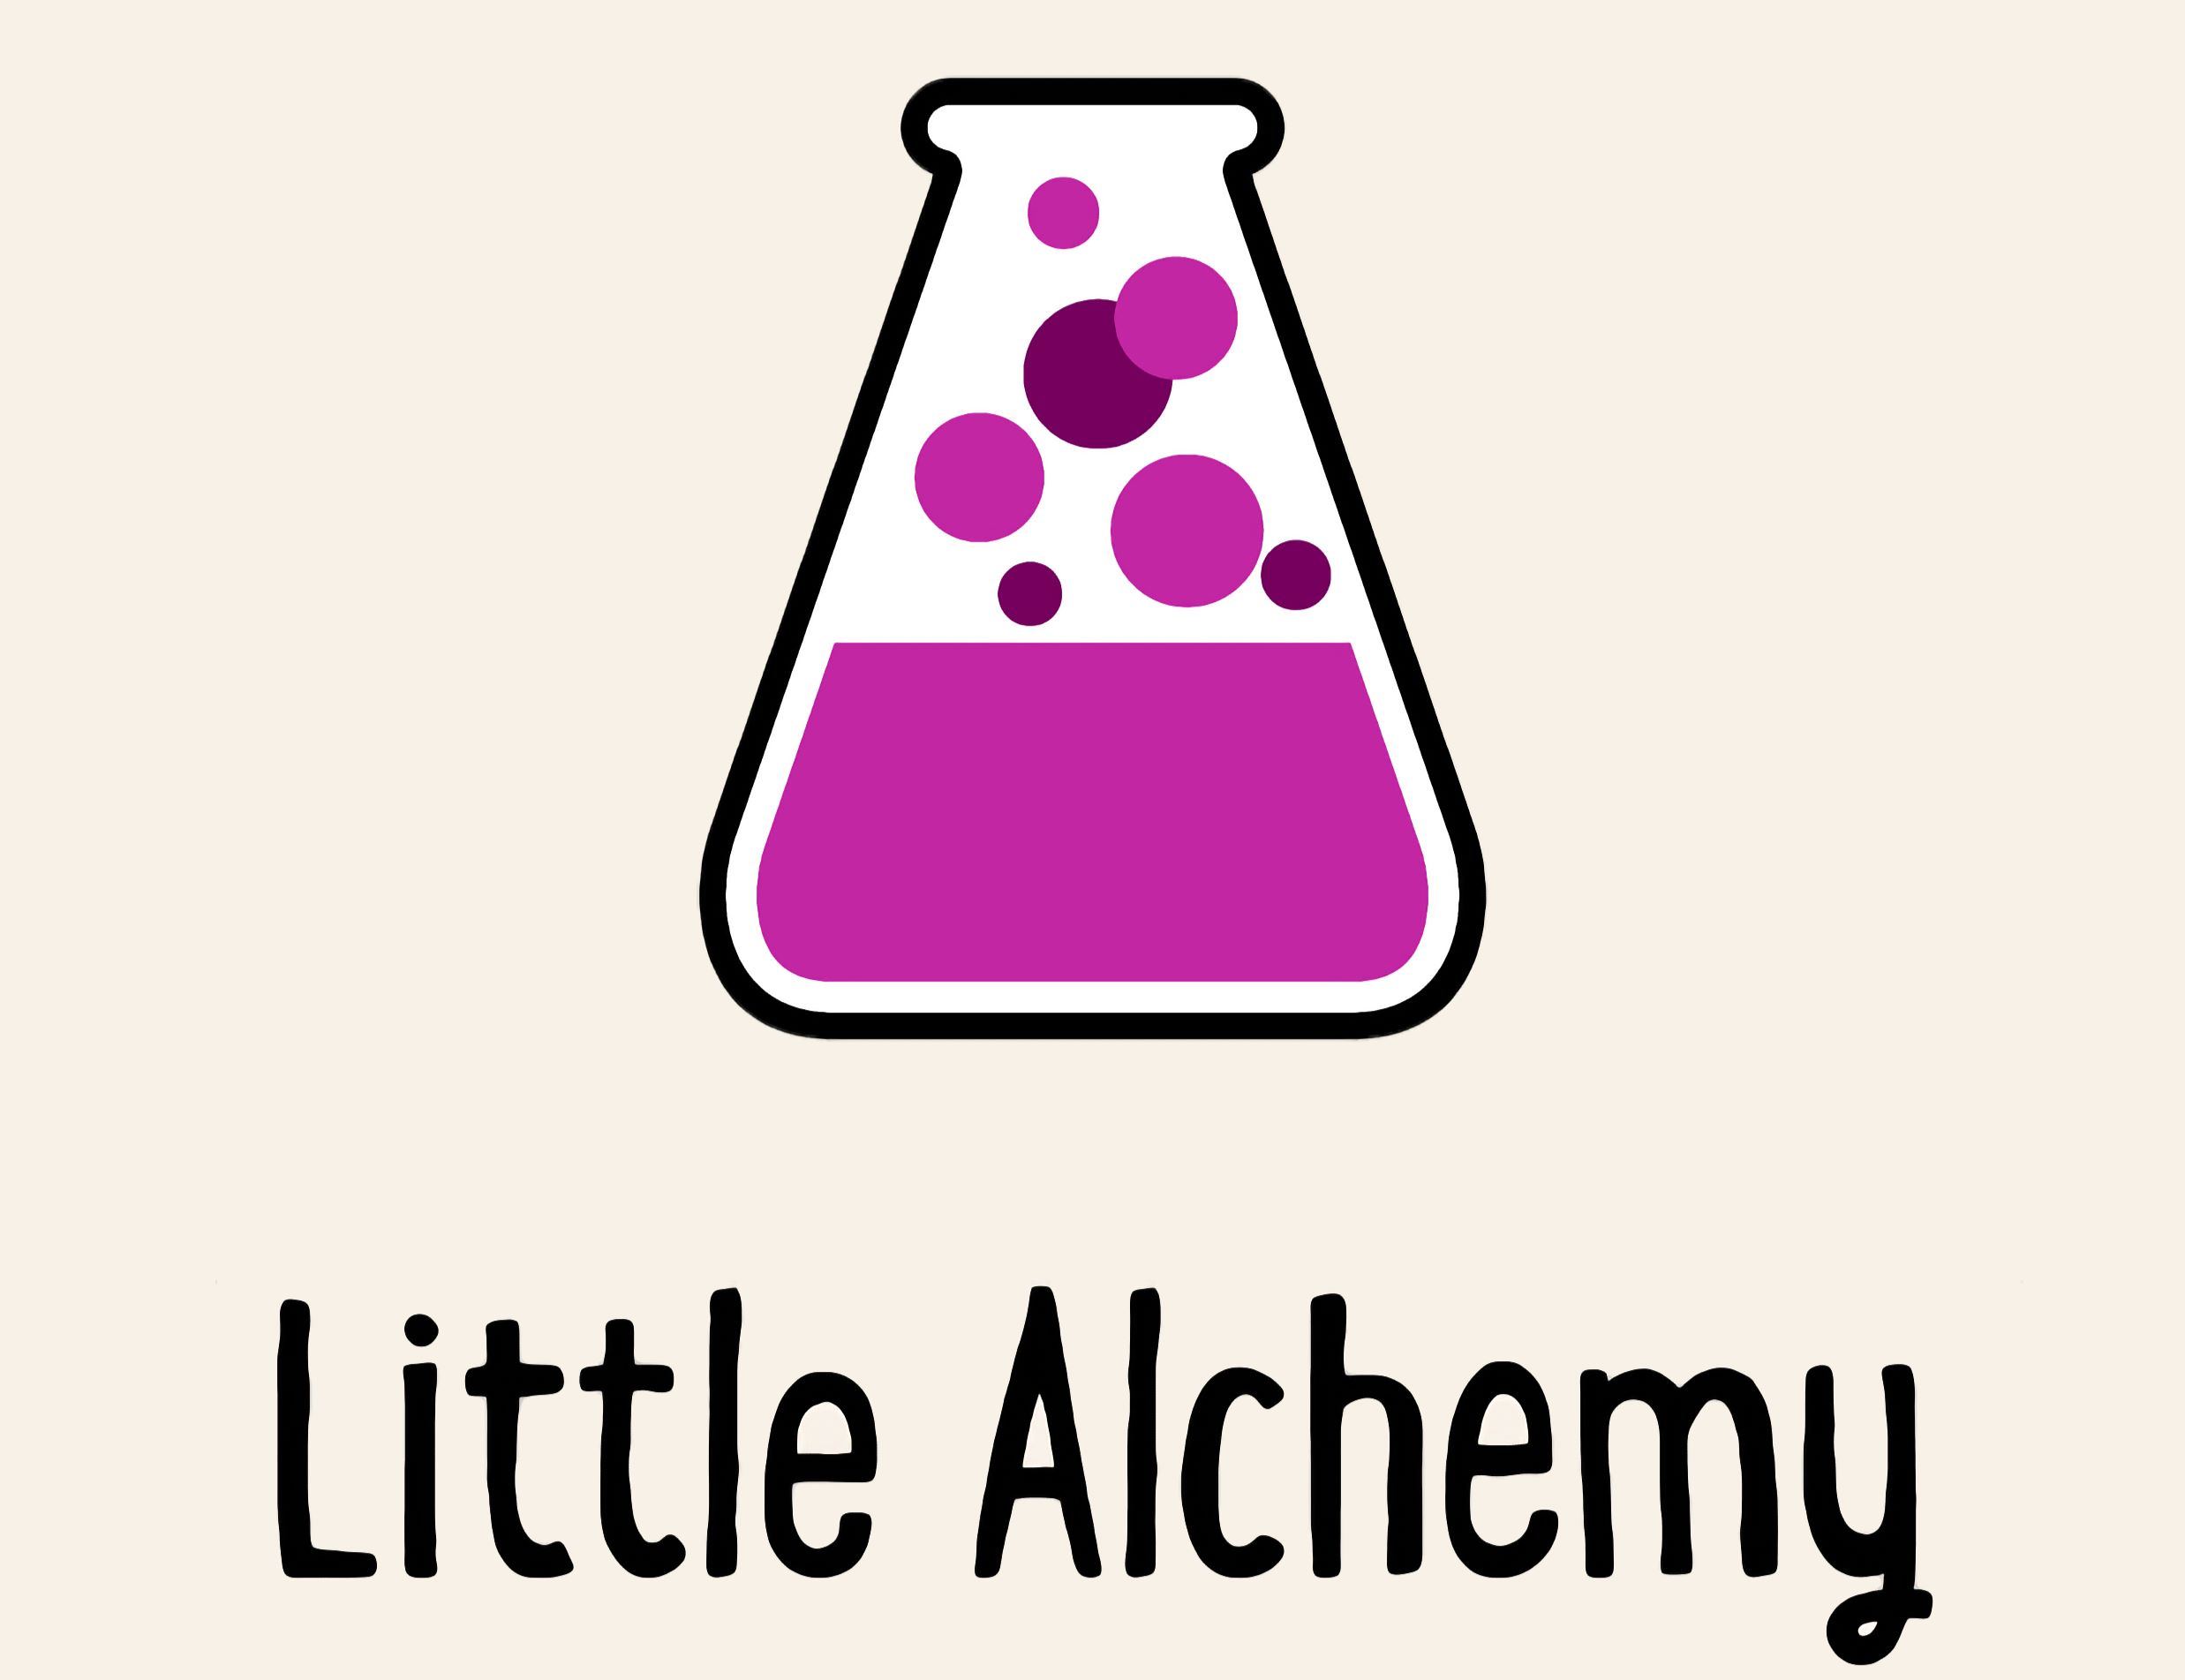 Master Little Alchemy: Unlock All Elements With These Proven Tips!